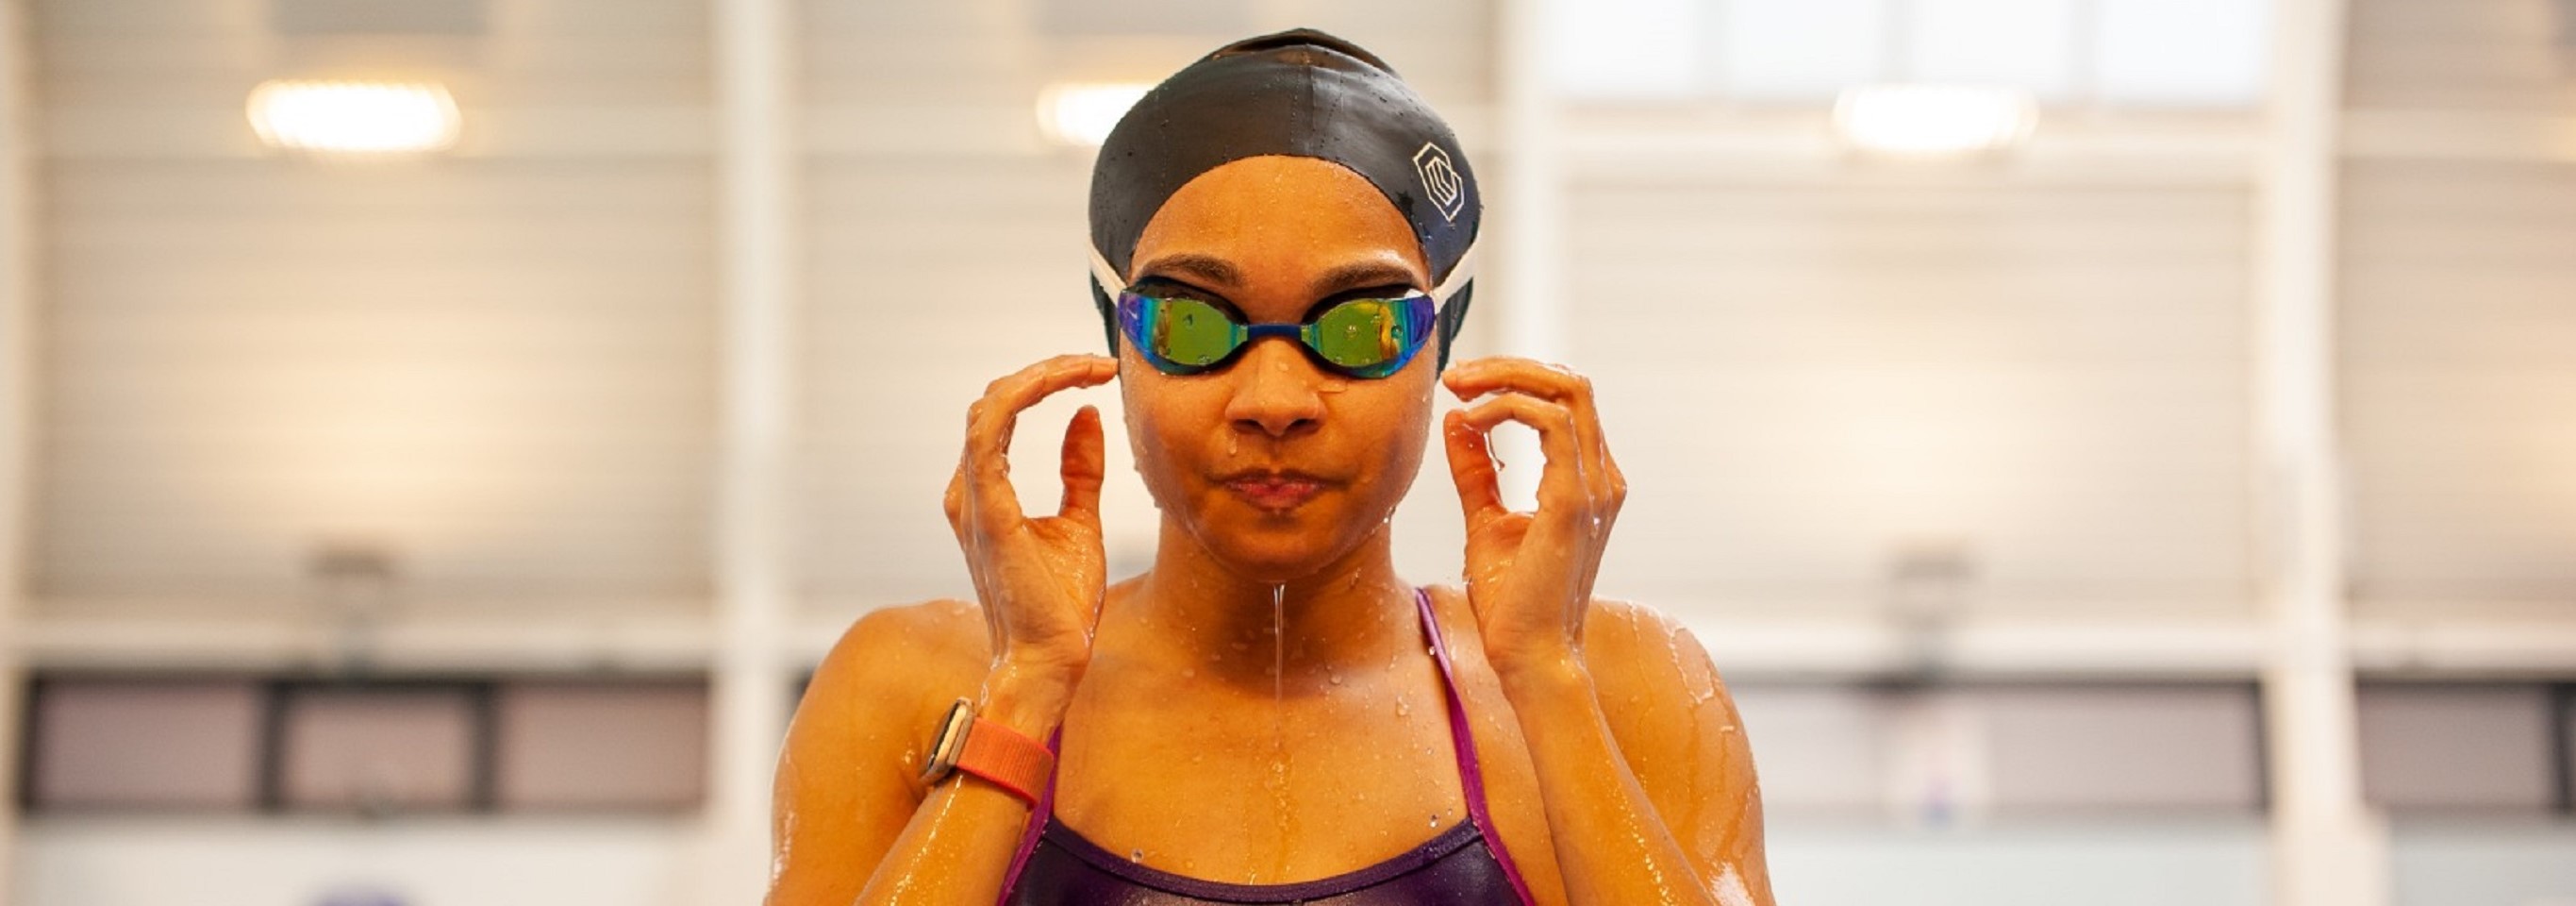 <span style="color:#1f5da0;">EdenTree's partnership with British swimmer Alice Dearing</span>